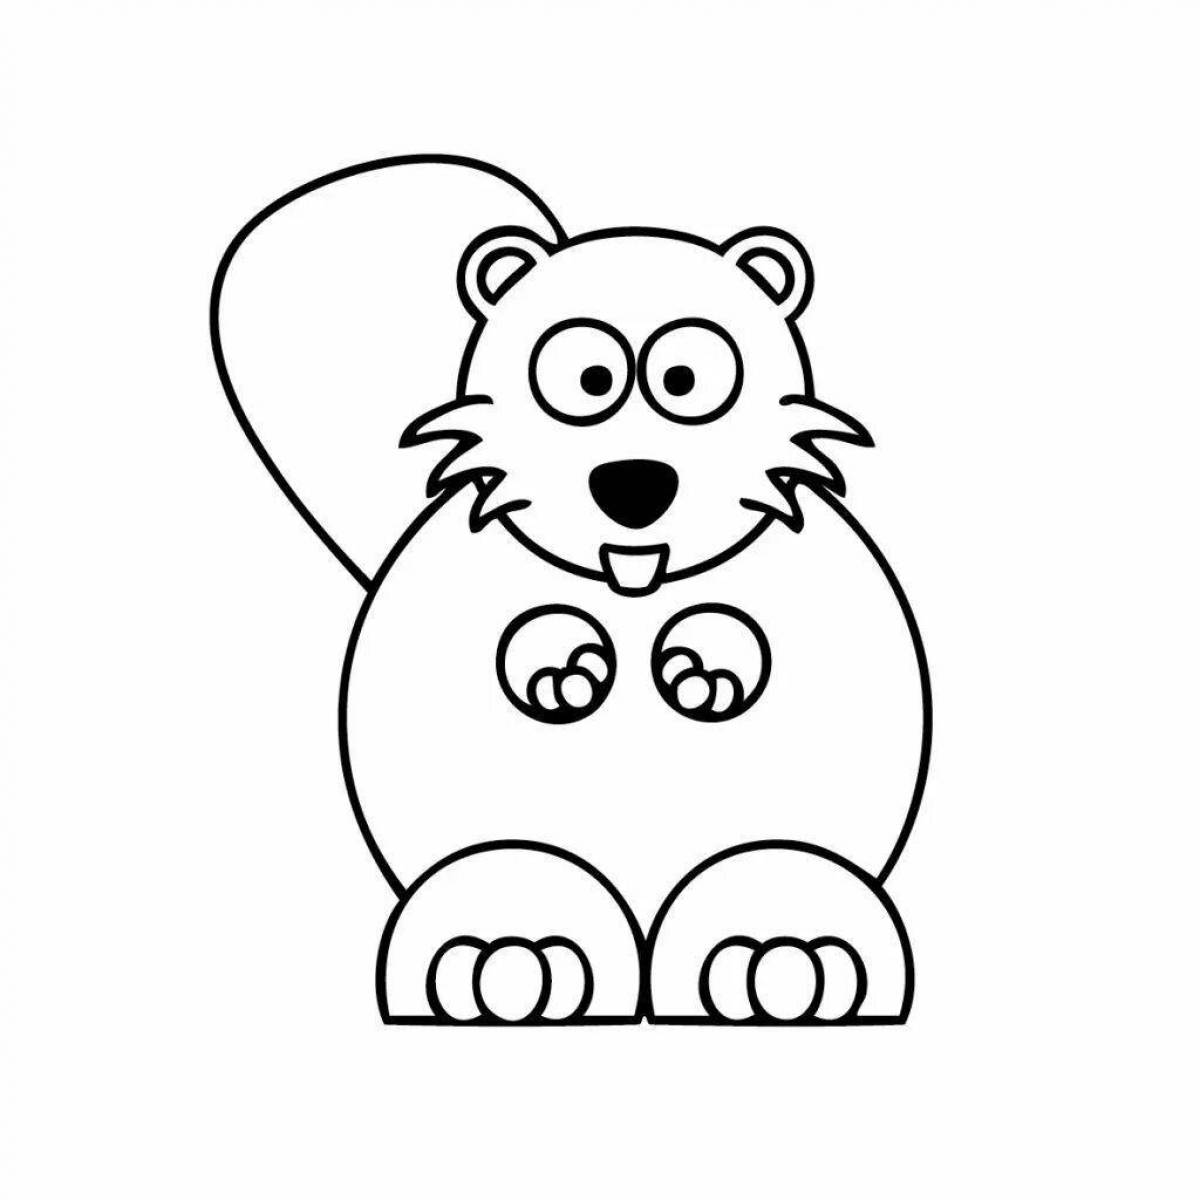 Coloring page of a sociable beaver